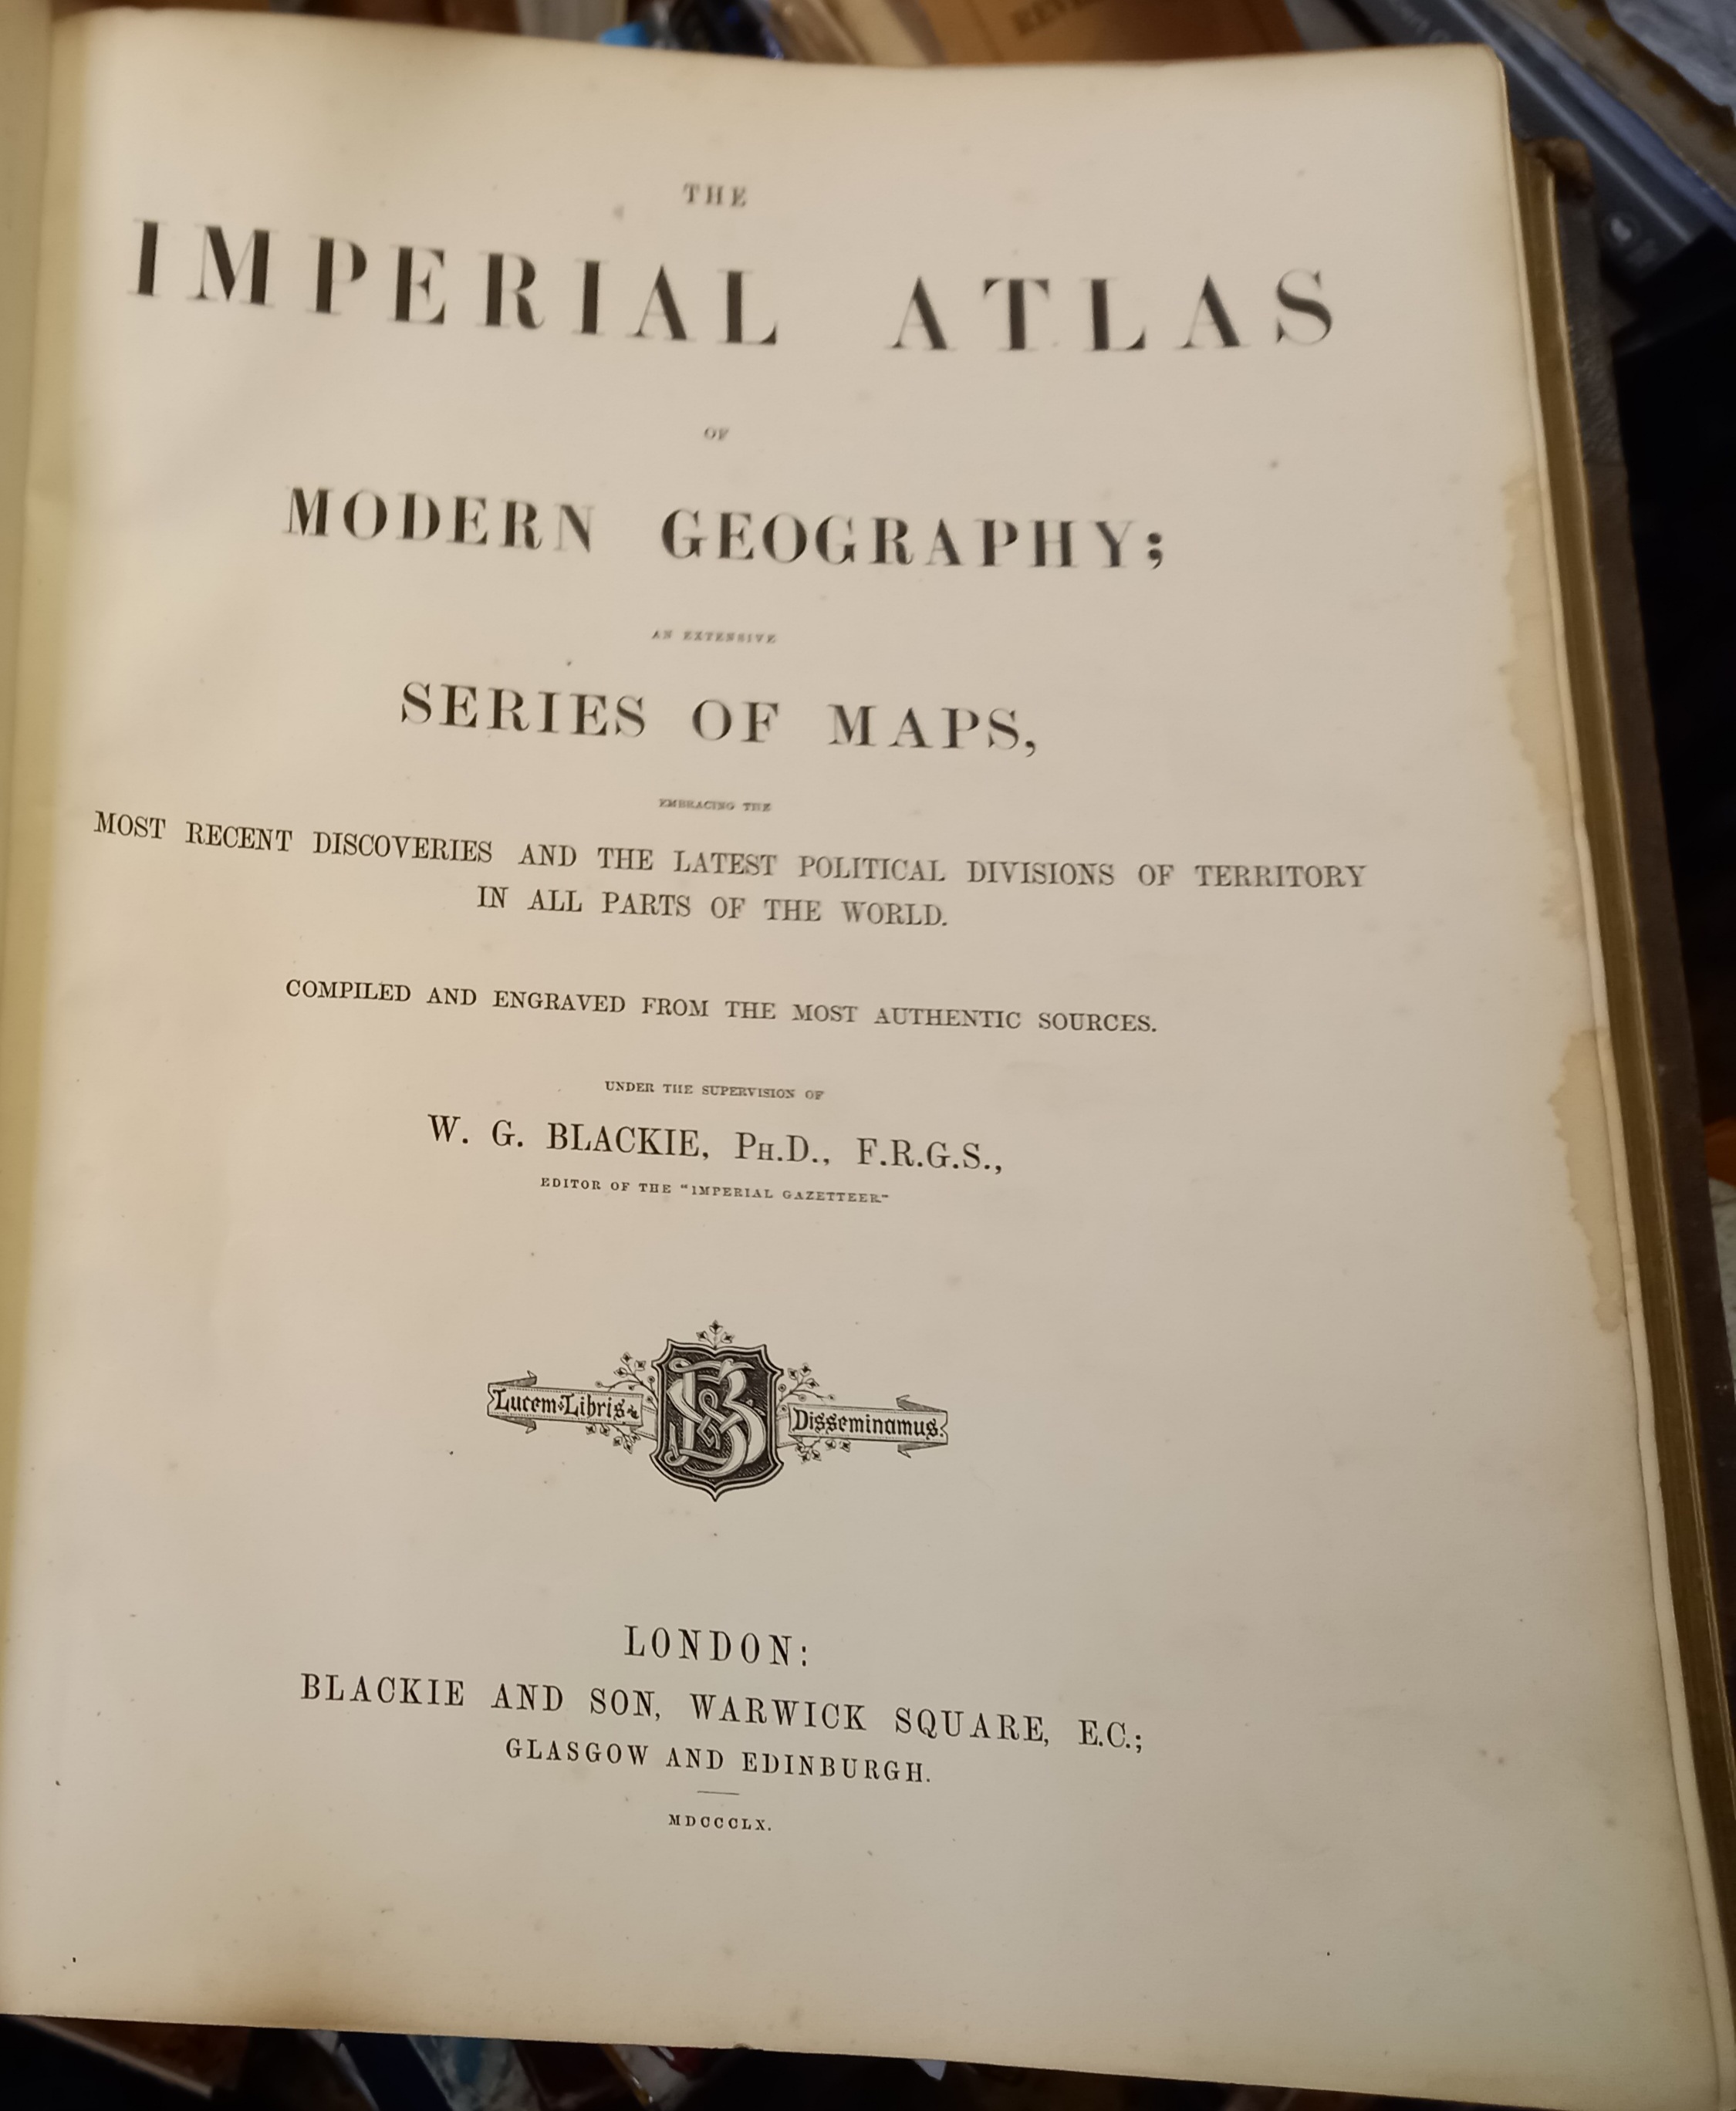 THE IMPERIAL ATLAS OF MODERN GEOGRAPHY ; An Extensive Series of Maps ...